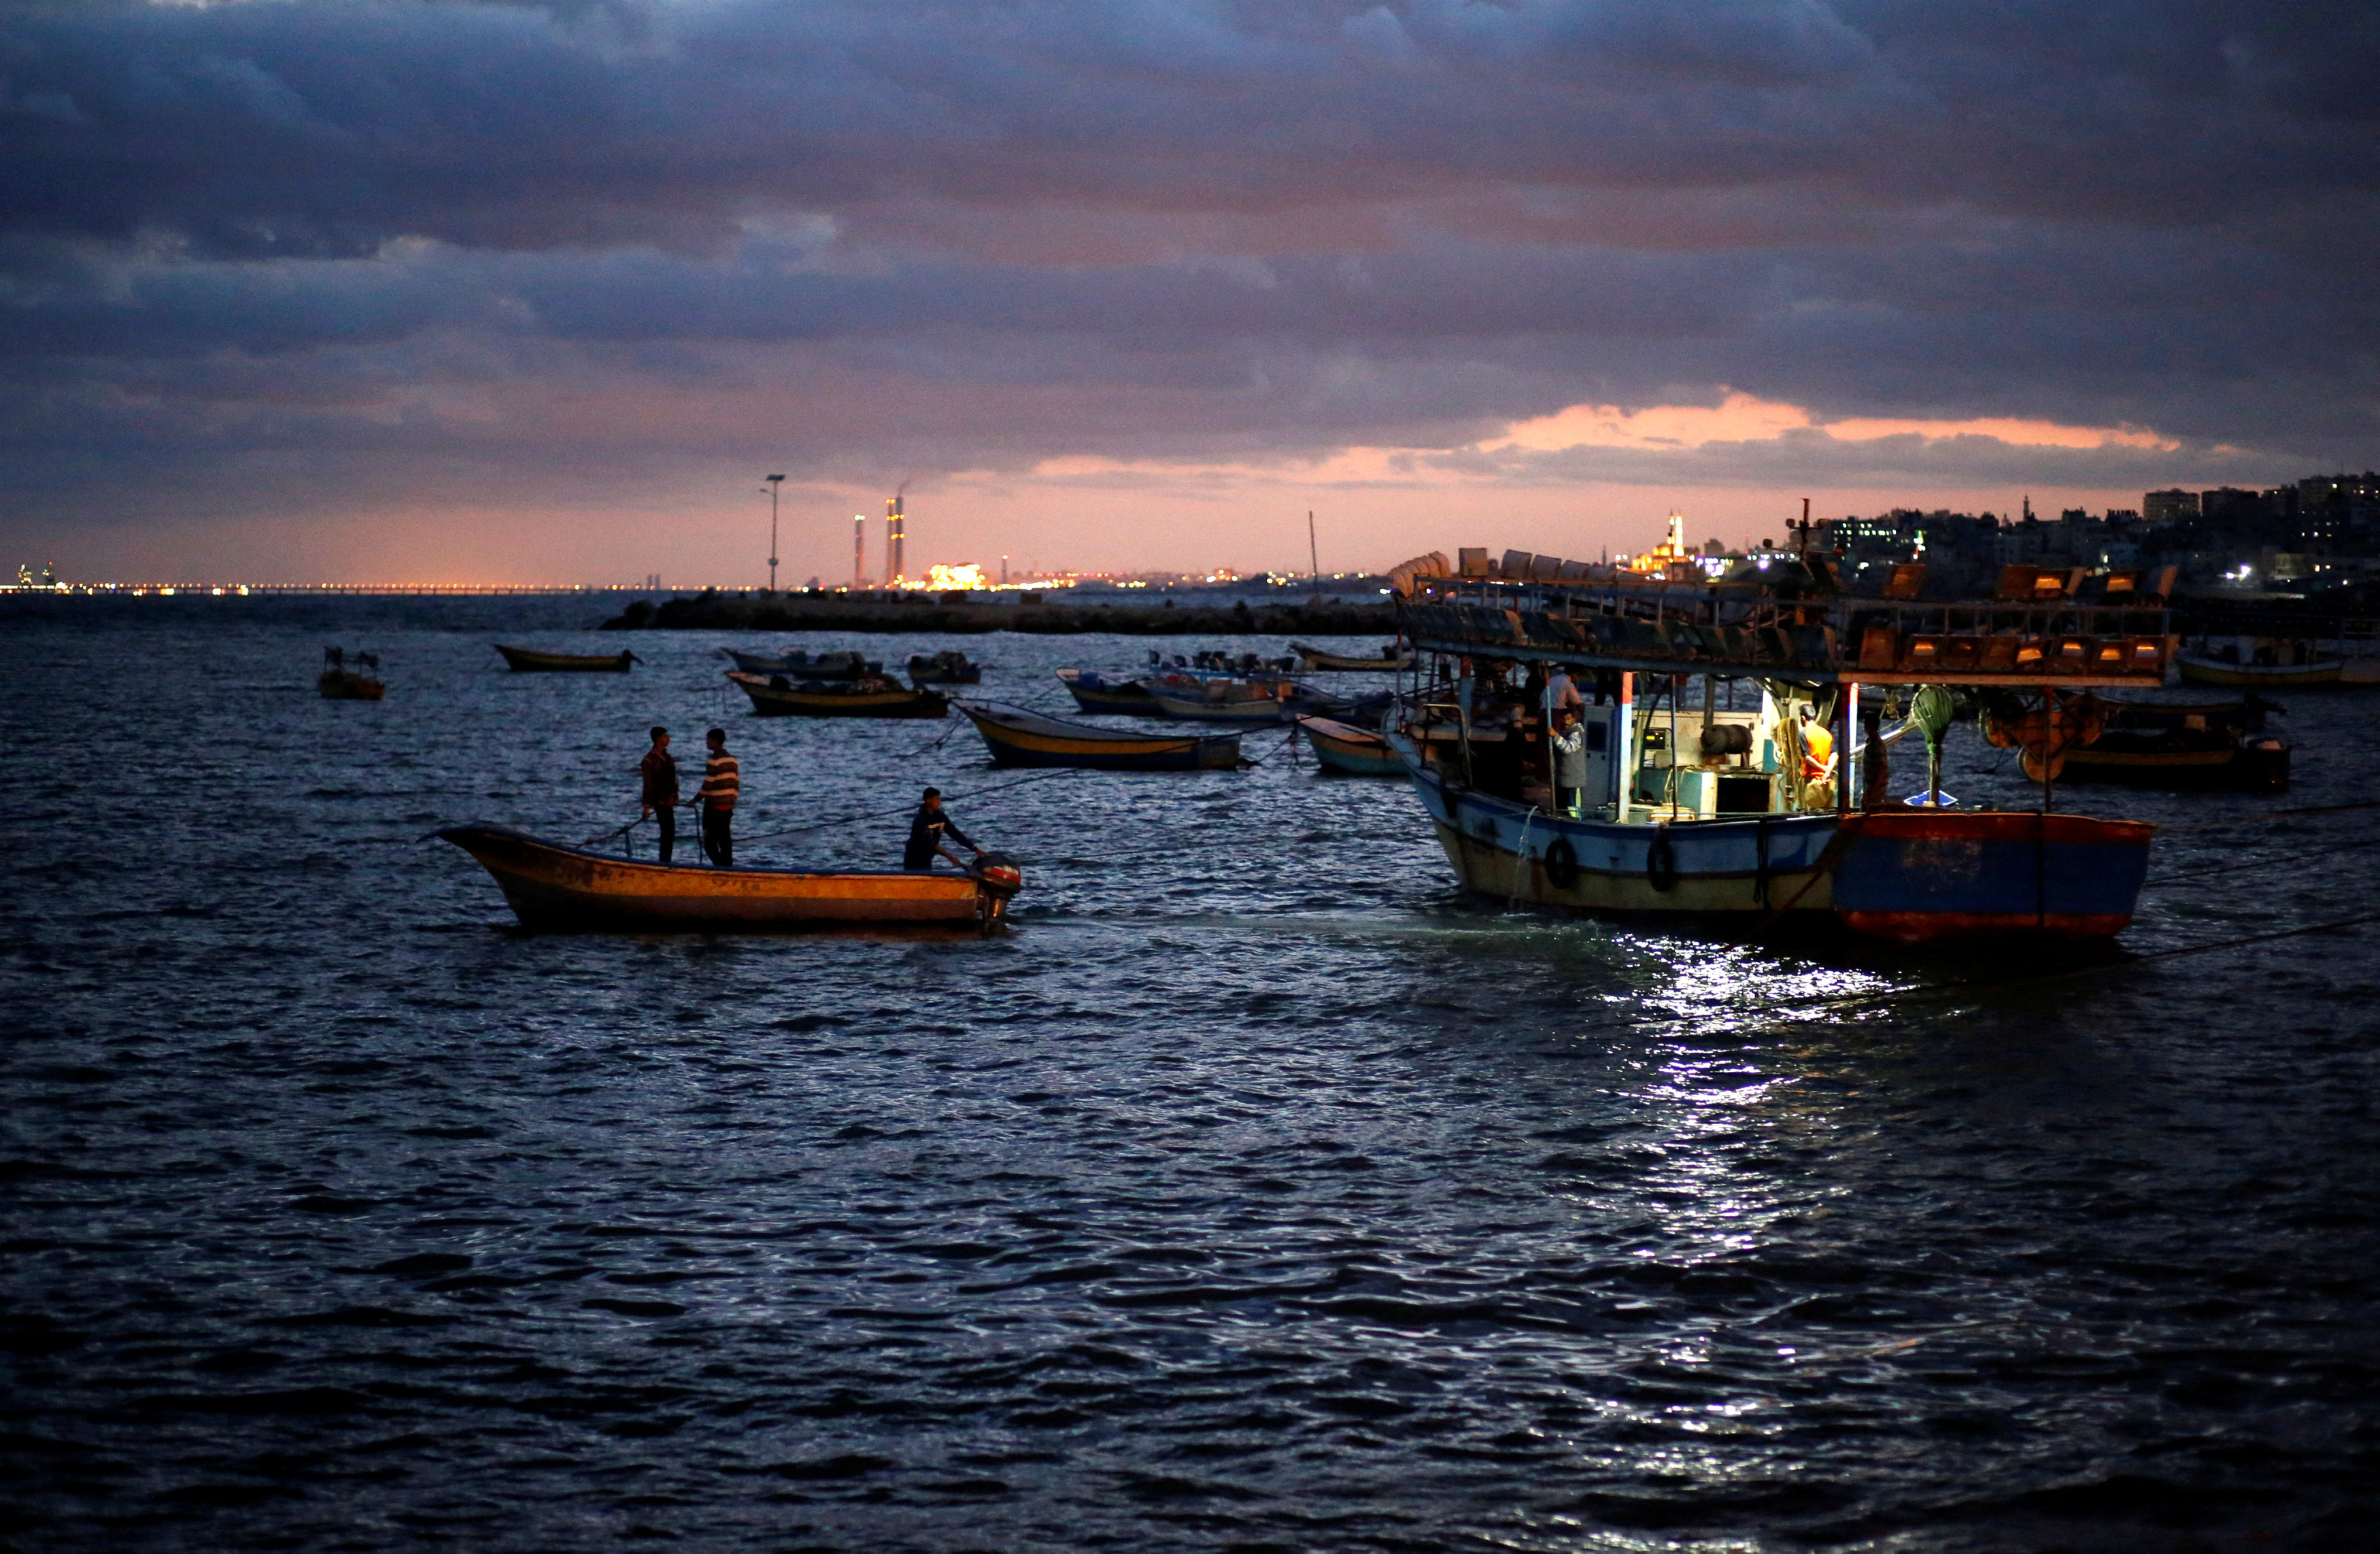 Gaza fishermen feel caught by Israel's tight security net